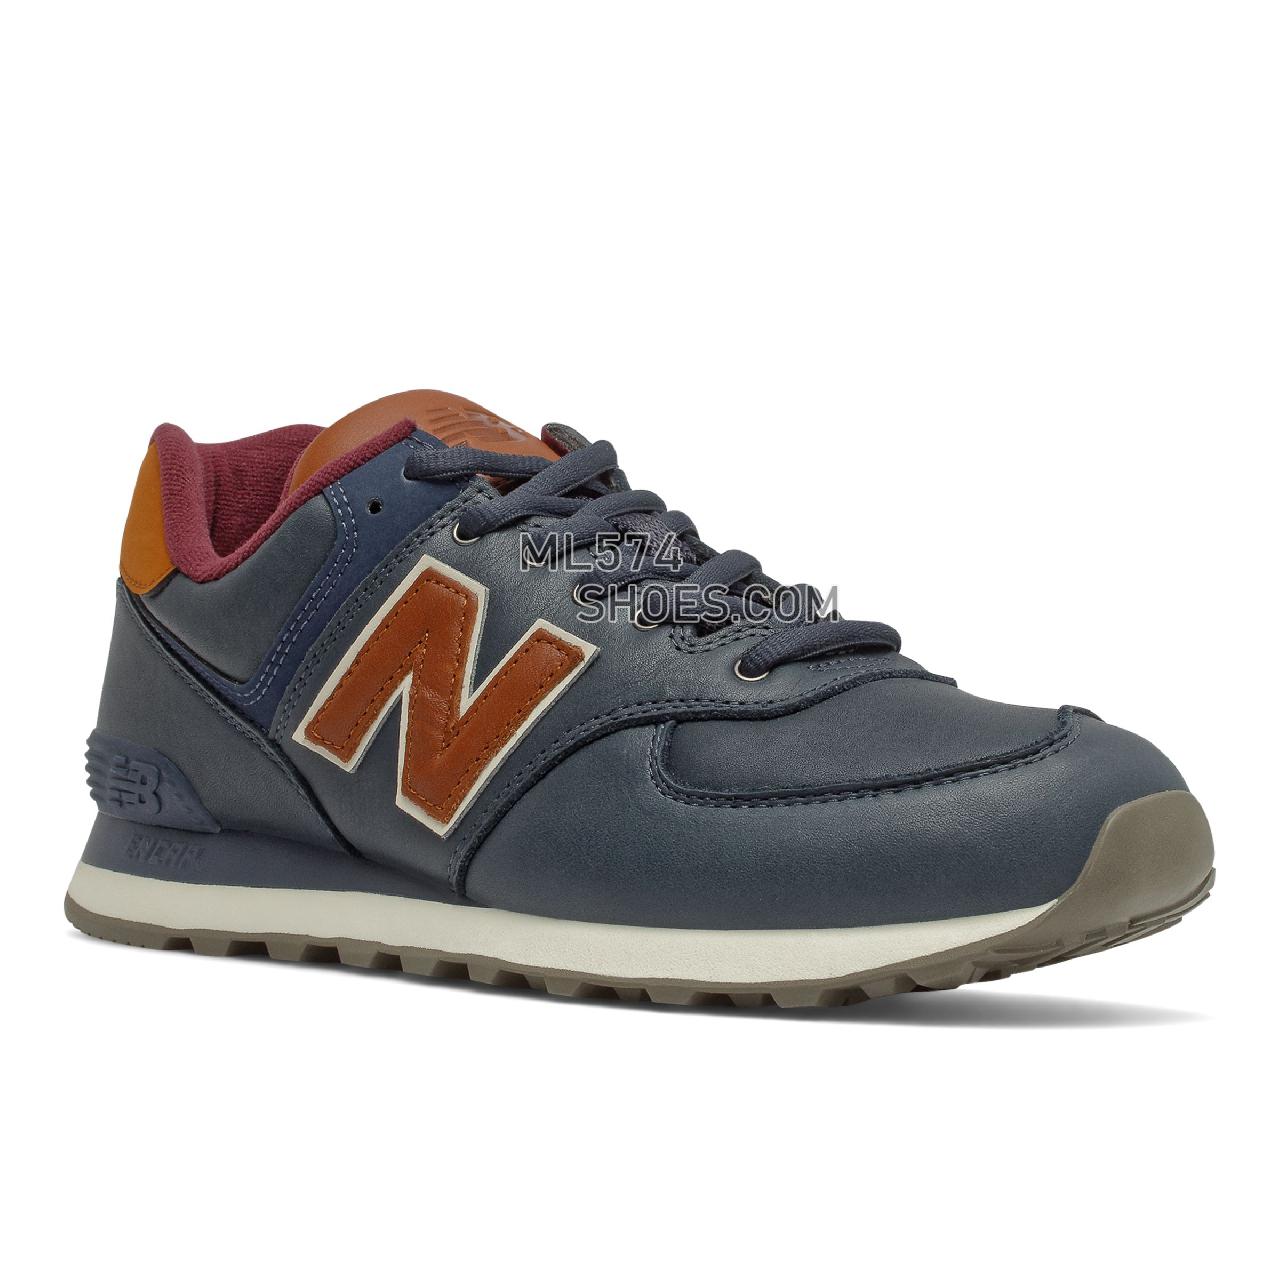 New Balance 574v2 - Men's Sport Style Sneakers - Nb Navy with Classic Burgundy - ML574OMC